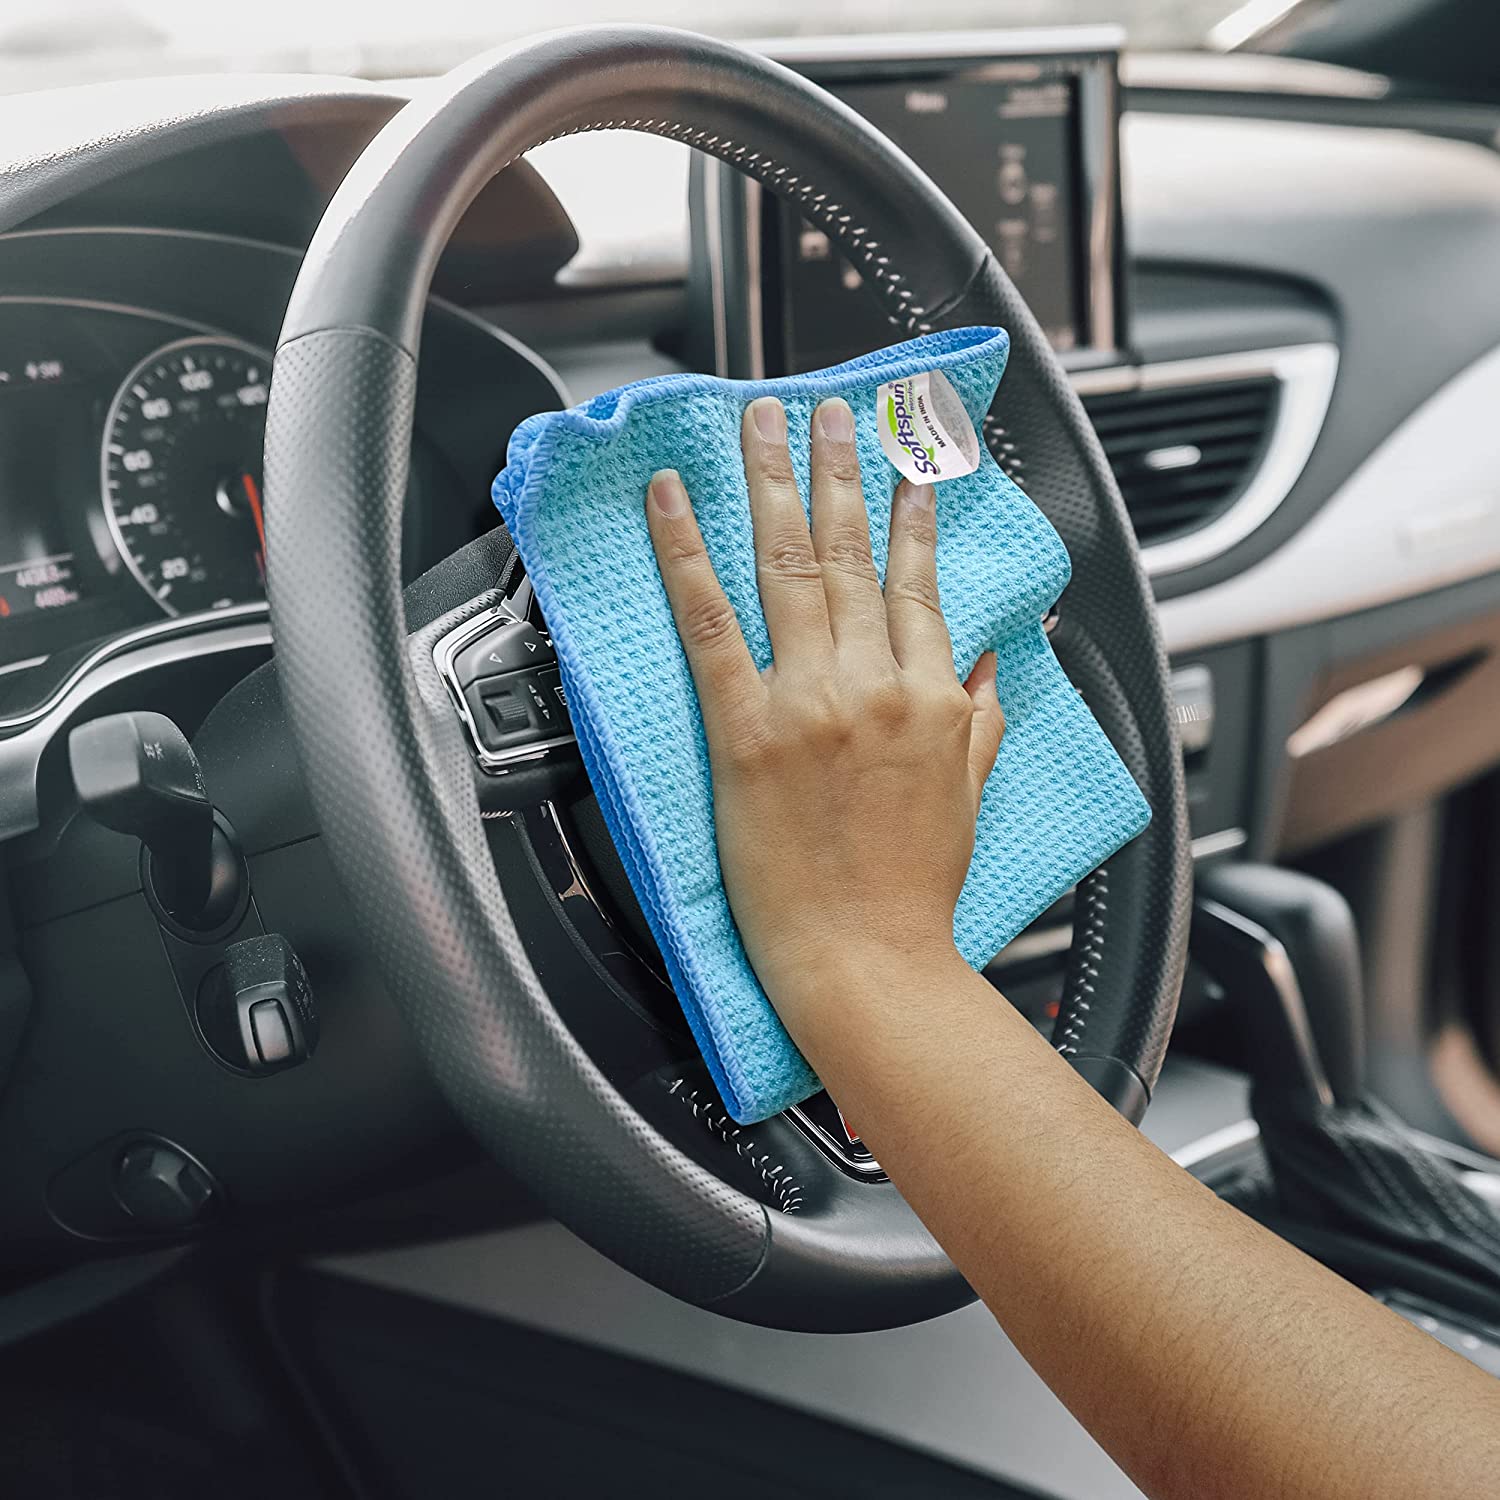 Softspun 400 GSM microfiber cloth is best for drying and best car polishing towel